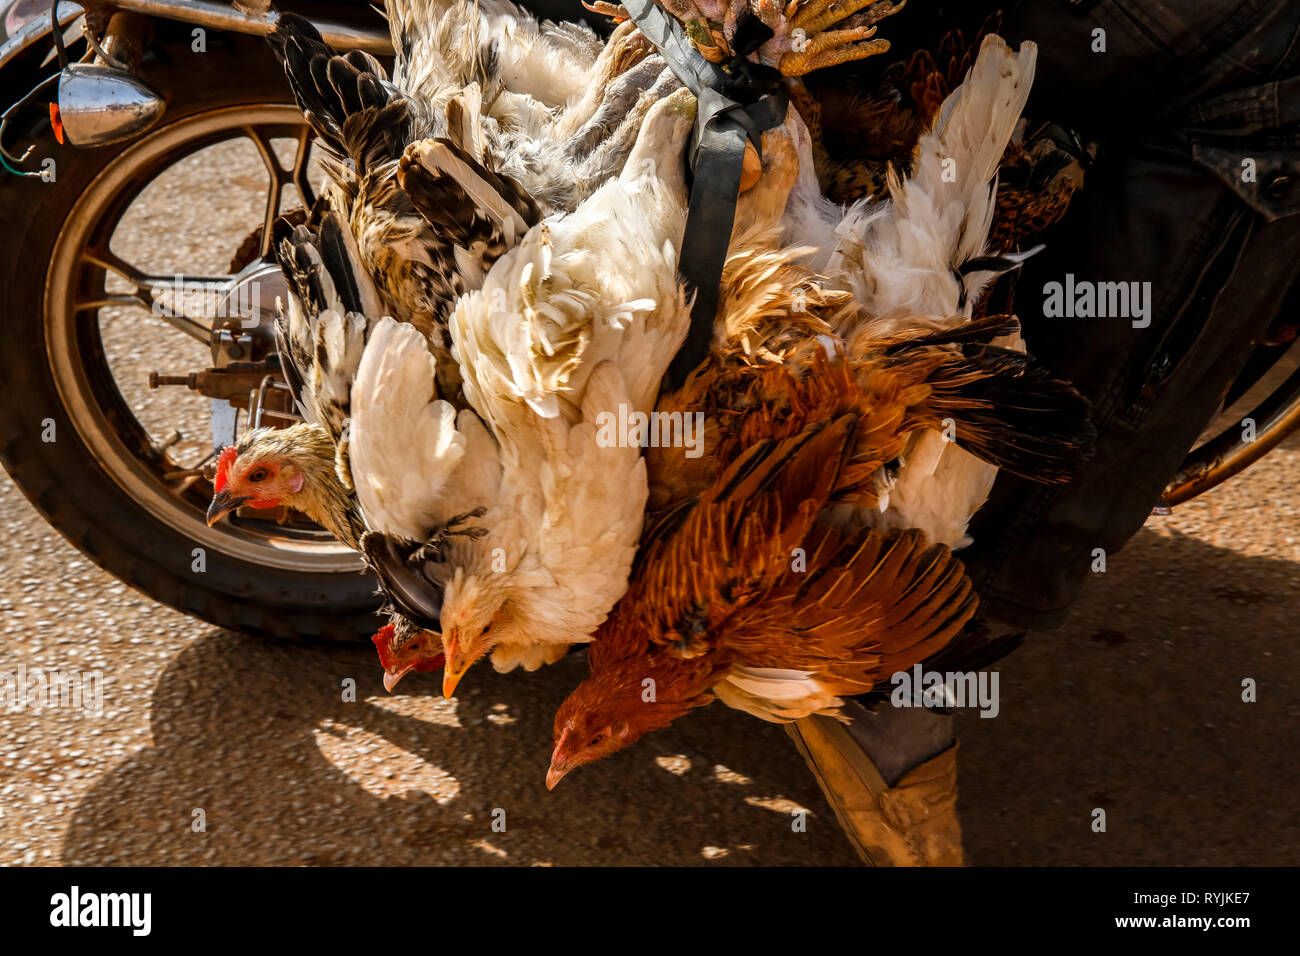 Carrying chickens on a scooter in Ouagadougou, Burkina Faso. Stock Photo